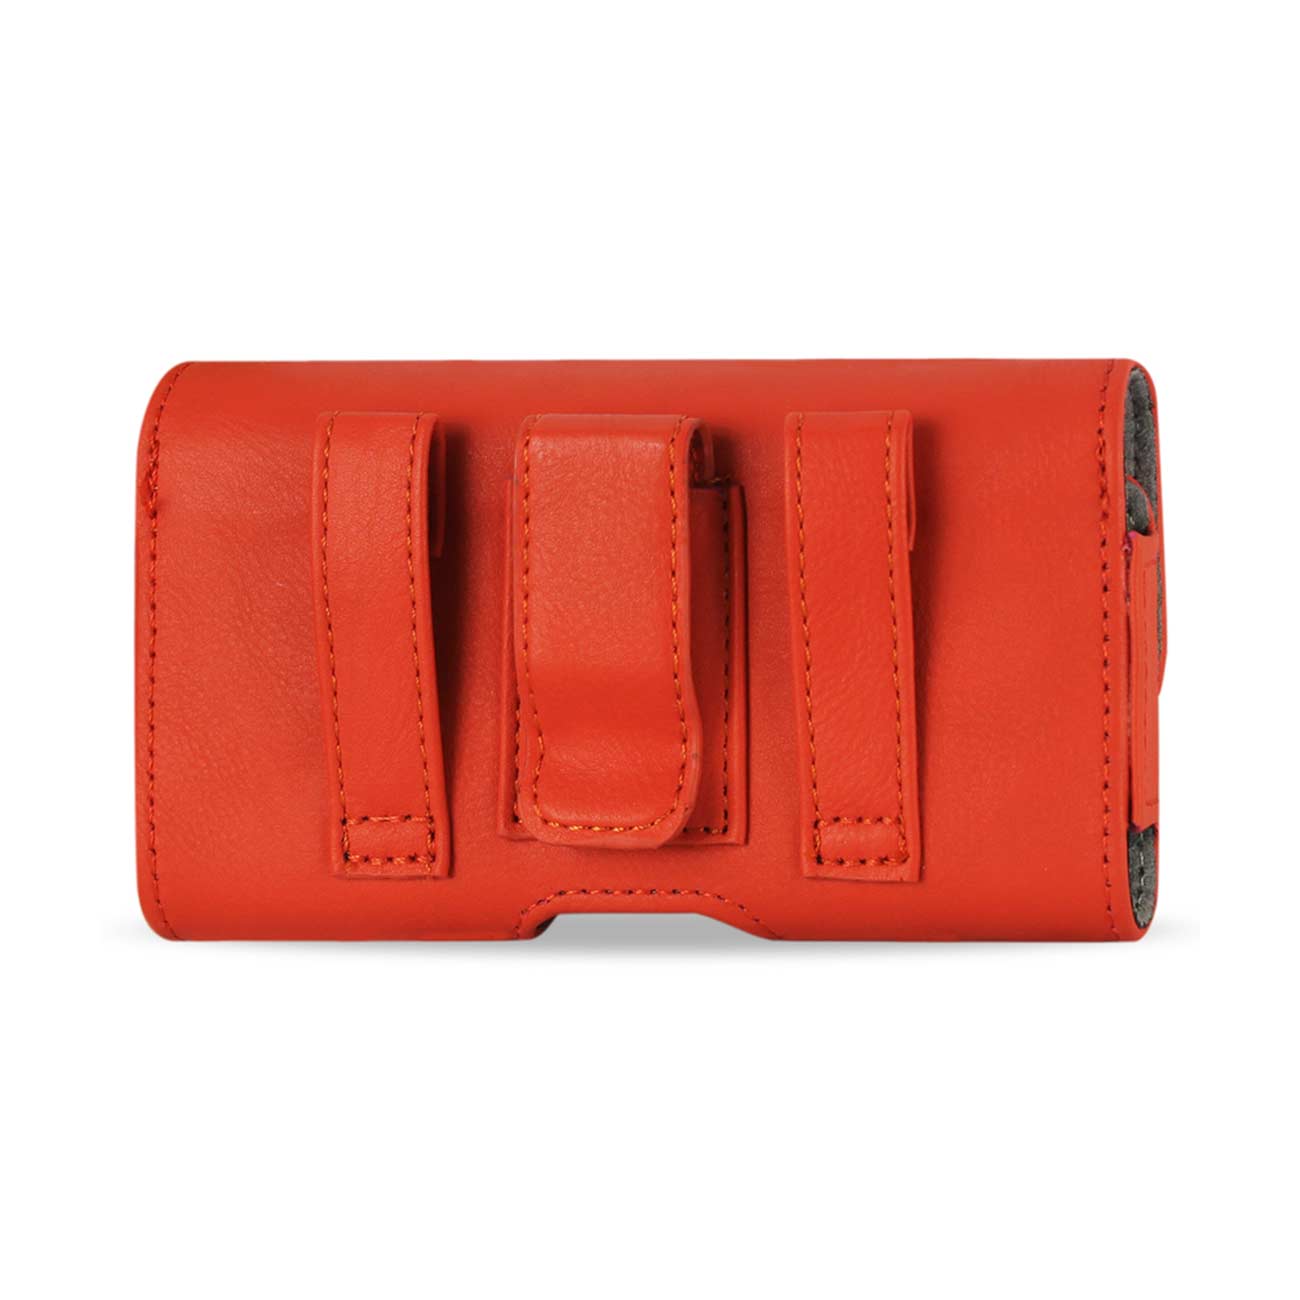 Horizontal Pouch With Easy Take Out Design Samsung Galaxy S Iii I9300 Plus Orange - image 3 of 3